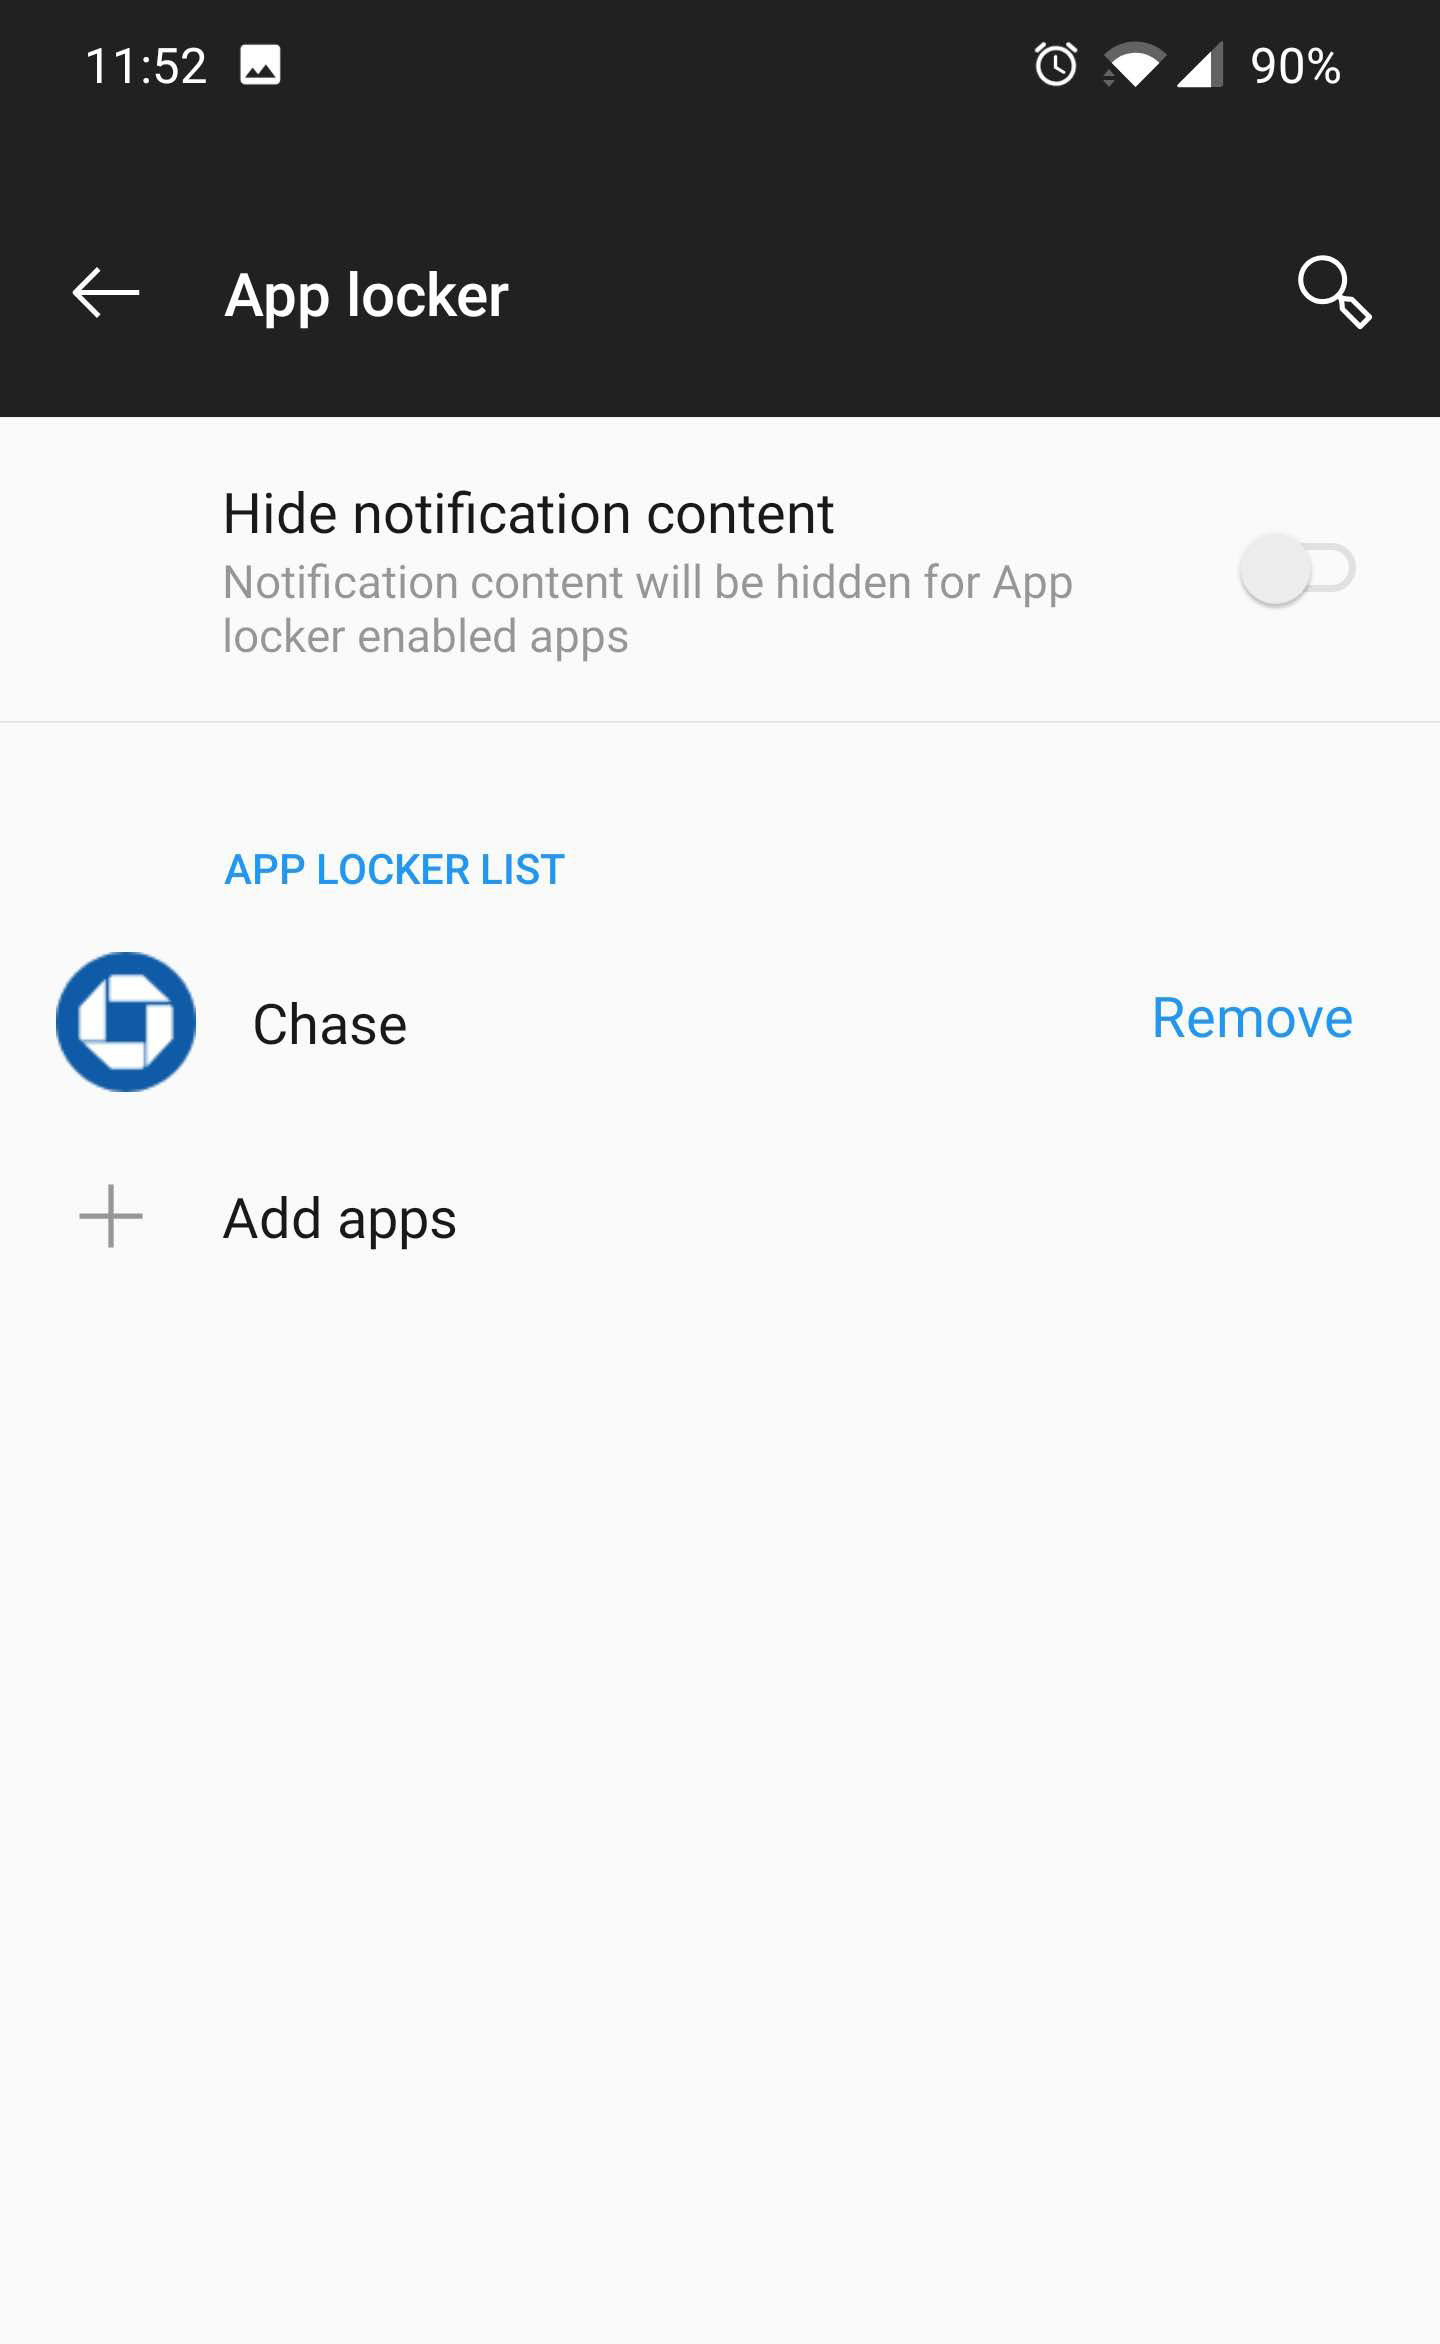 A screenshot of how to access the App Locker in OxygenOS.